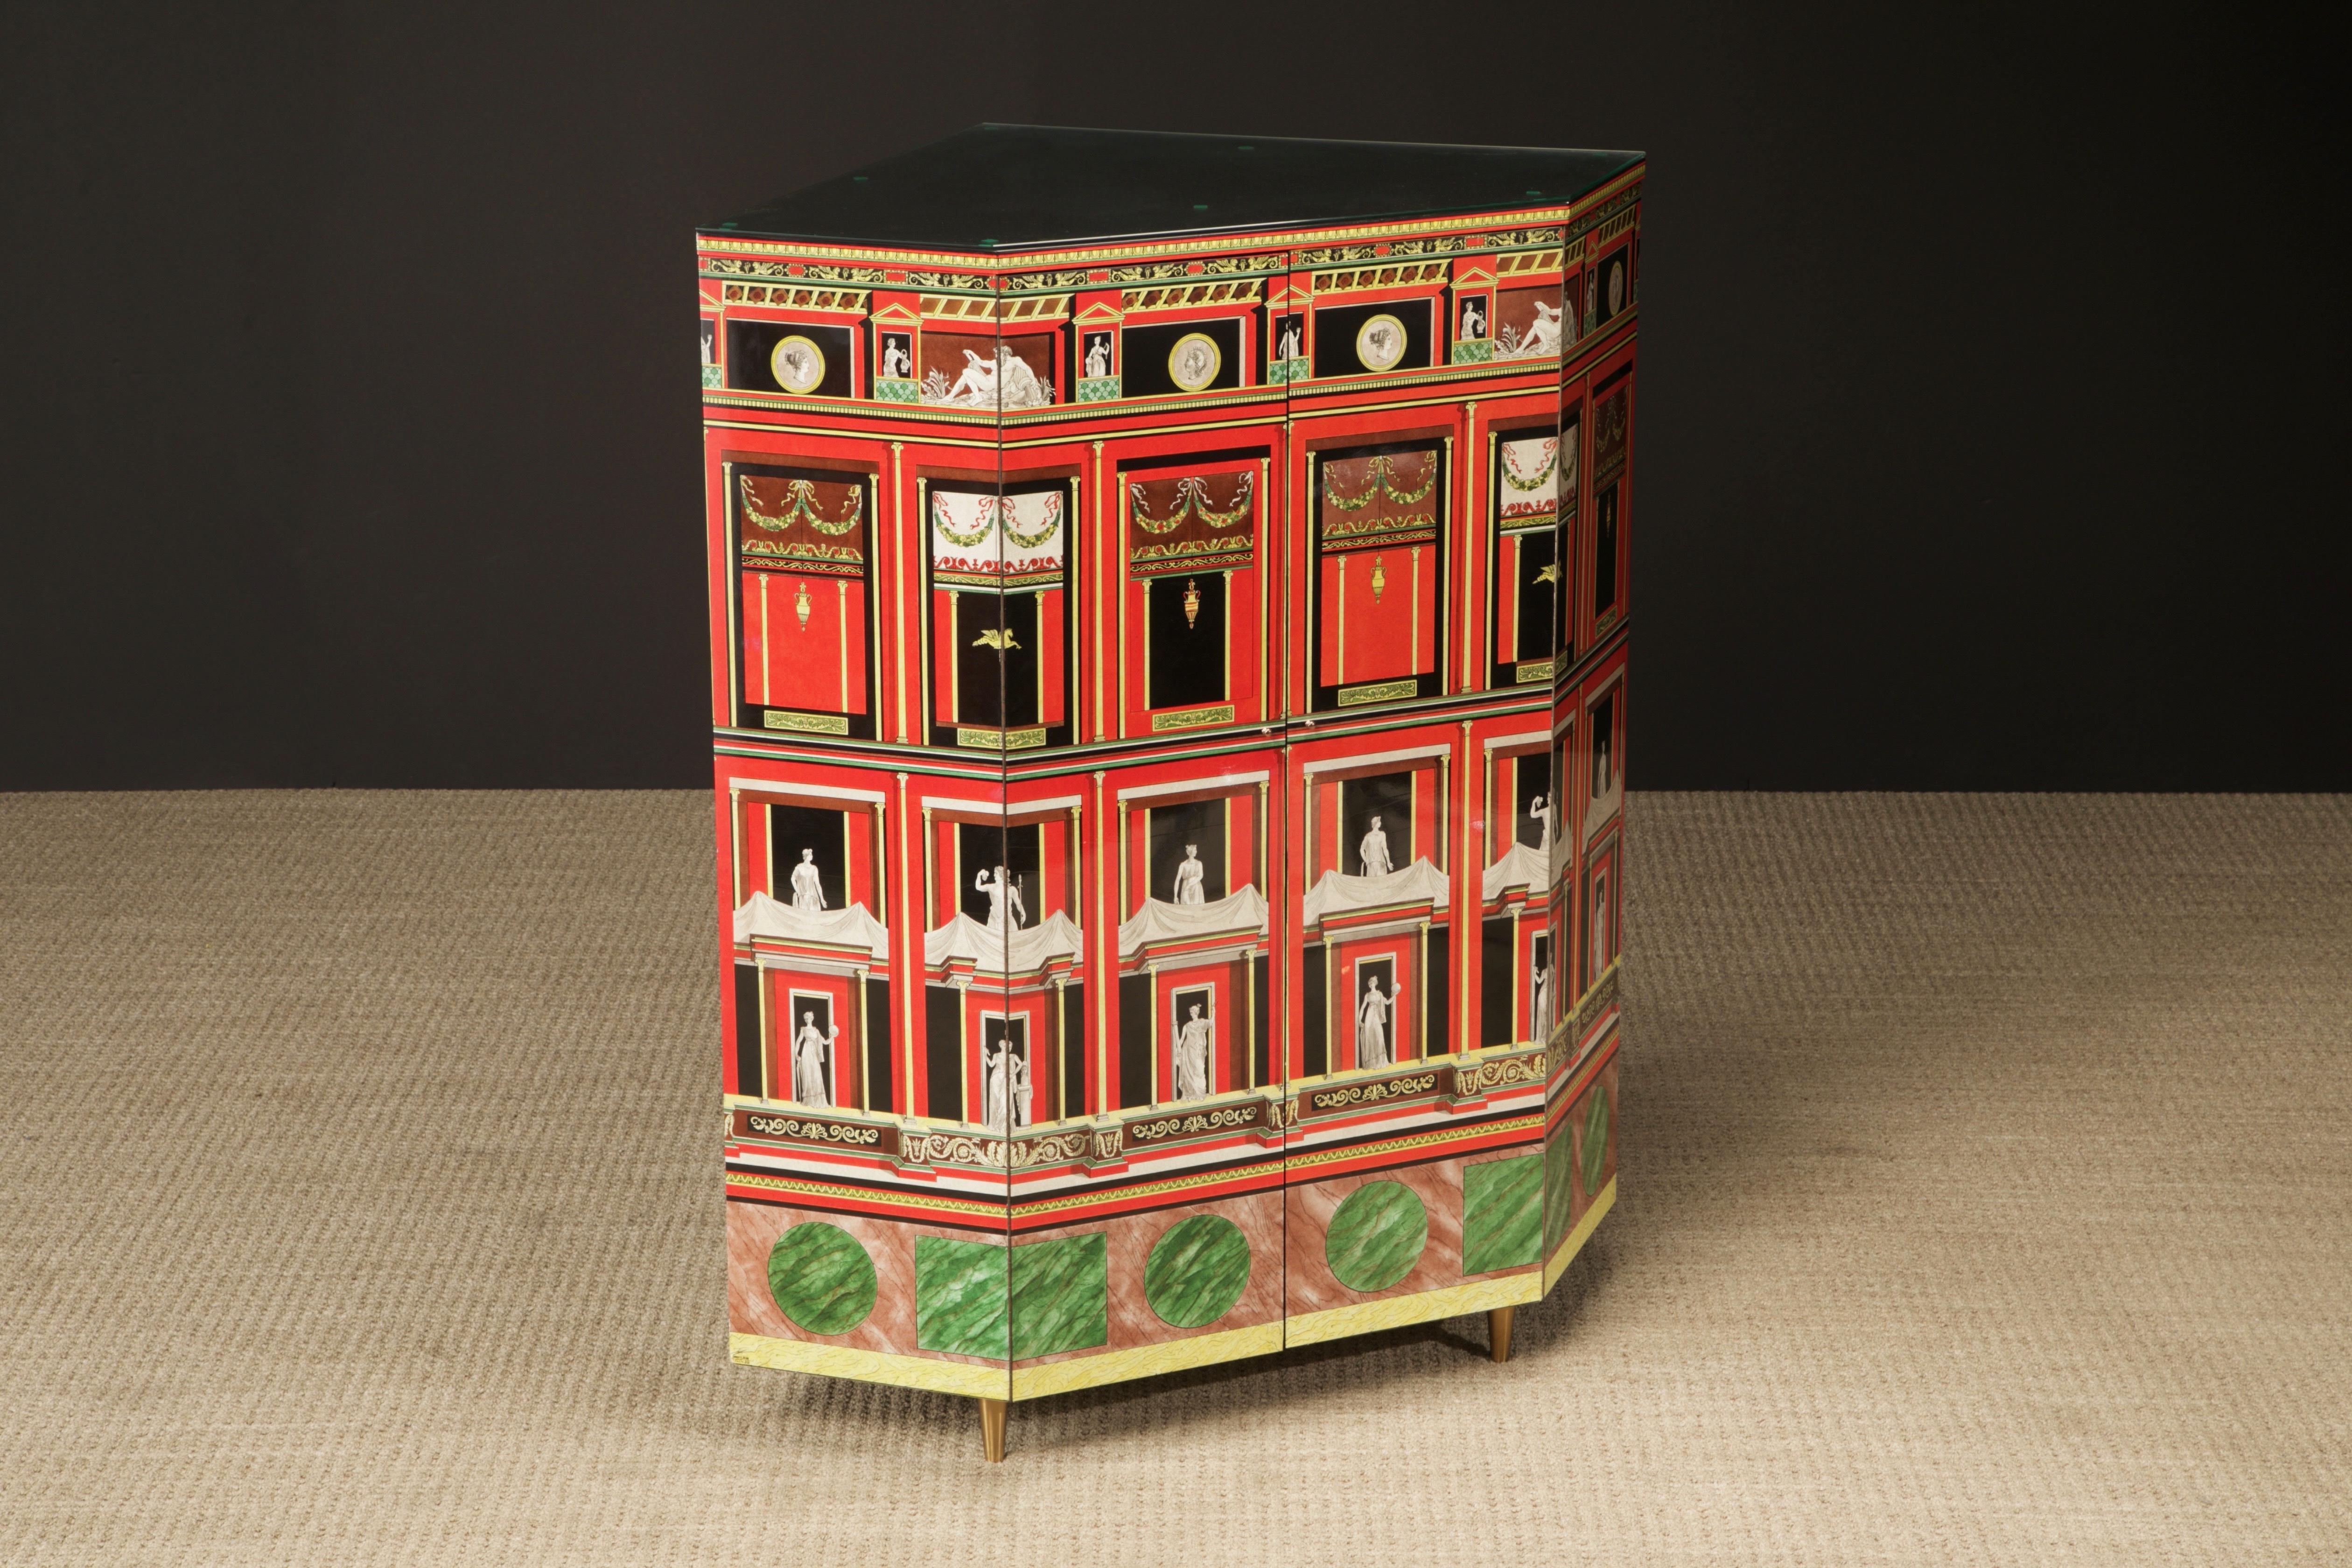 Italian 'Pompeiana' Corner Cabinet by Piero Fornasetti, Italy, 2 of 2 in 1988, Signed  For Sale